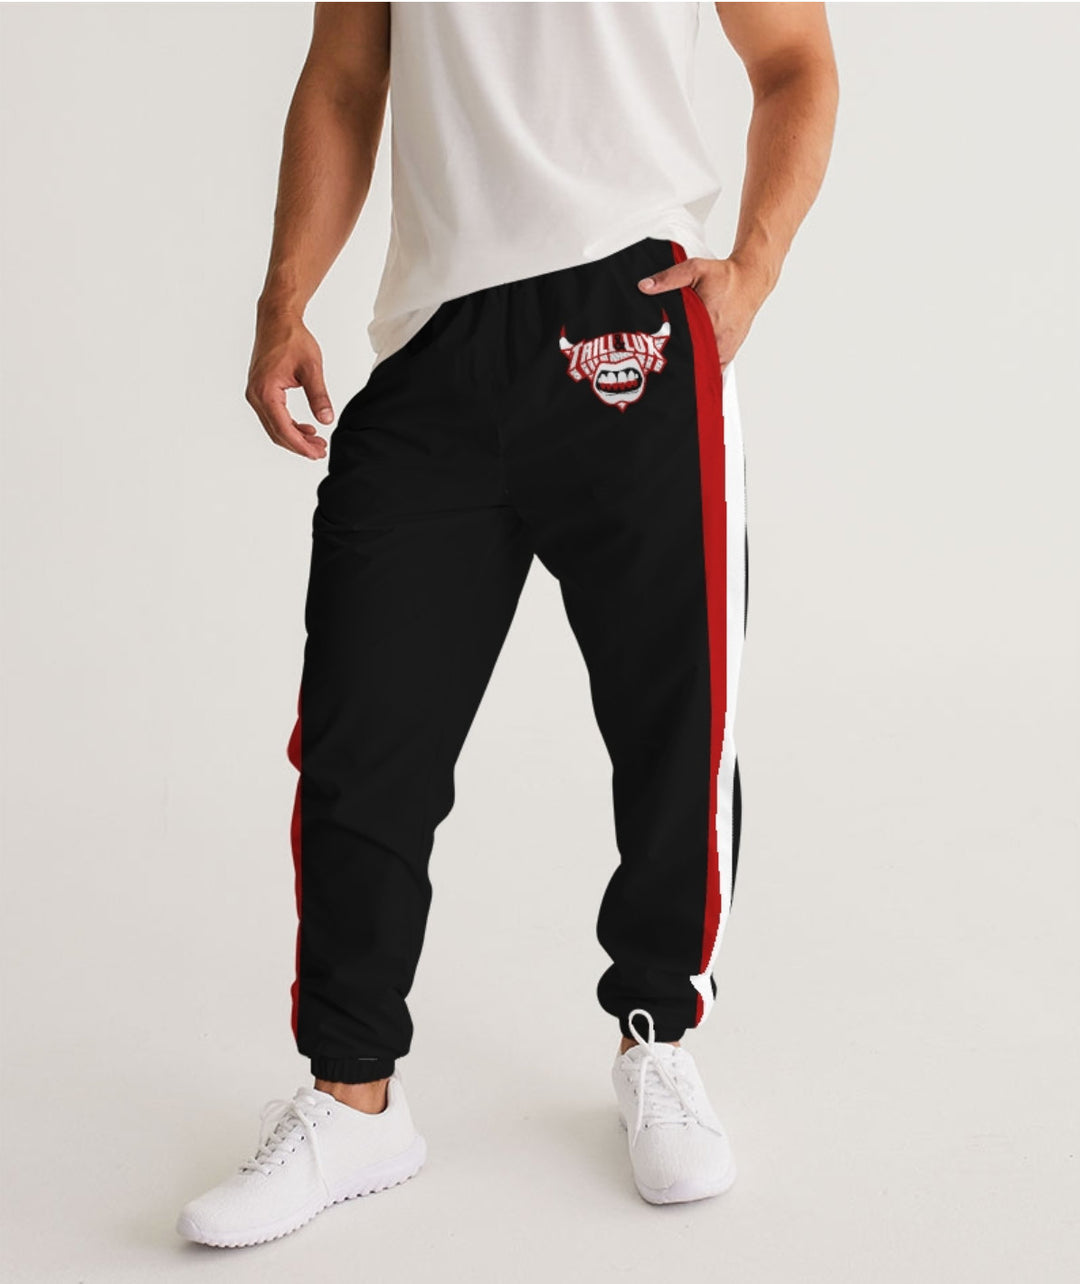 Trill and Lux | Air jordan 11 Bred Colorblock Inspired | Track Pants | XI | Black